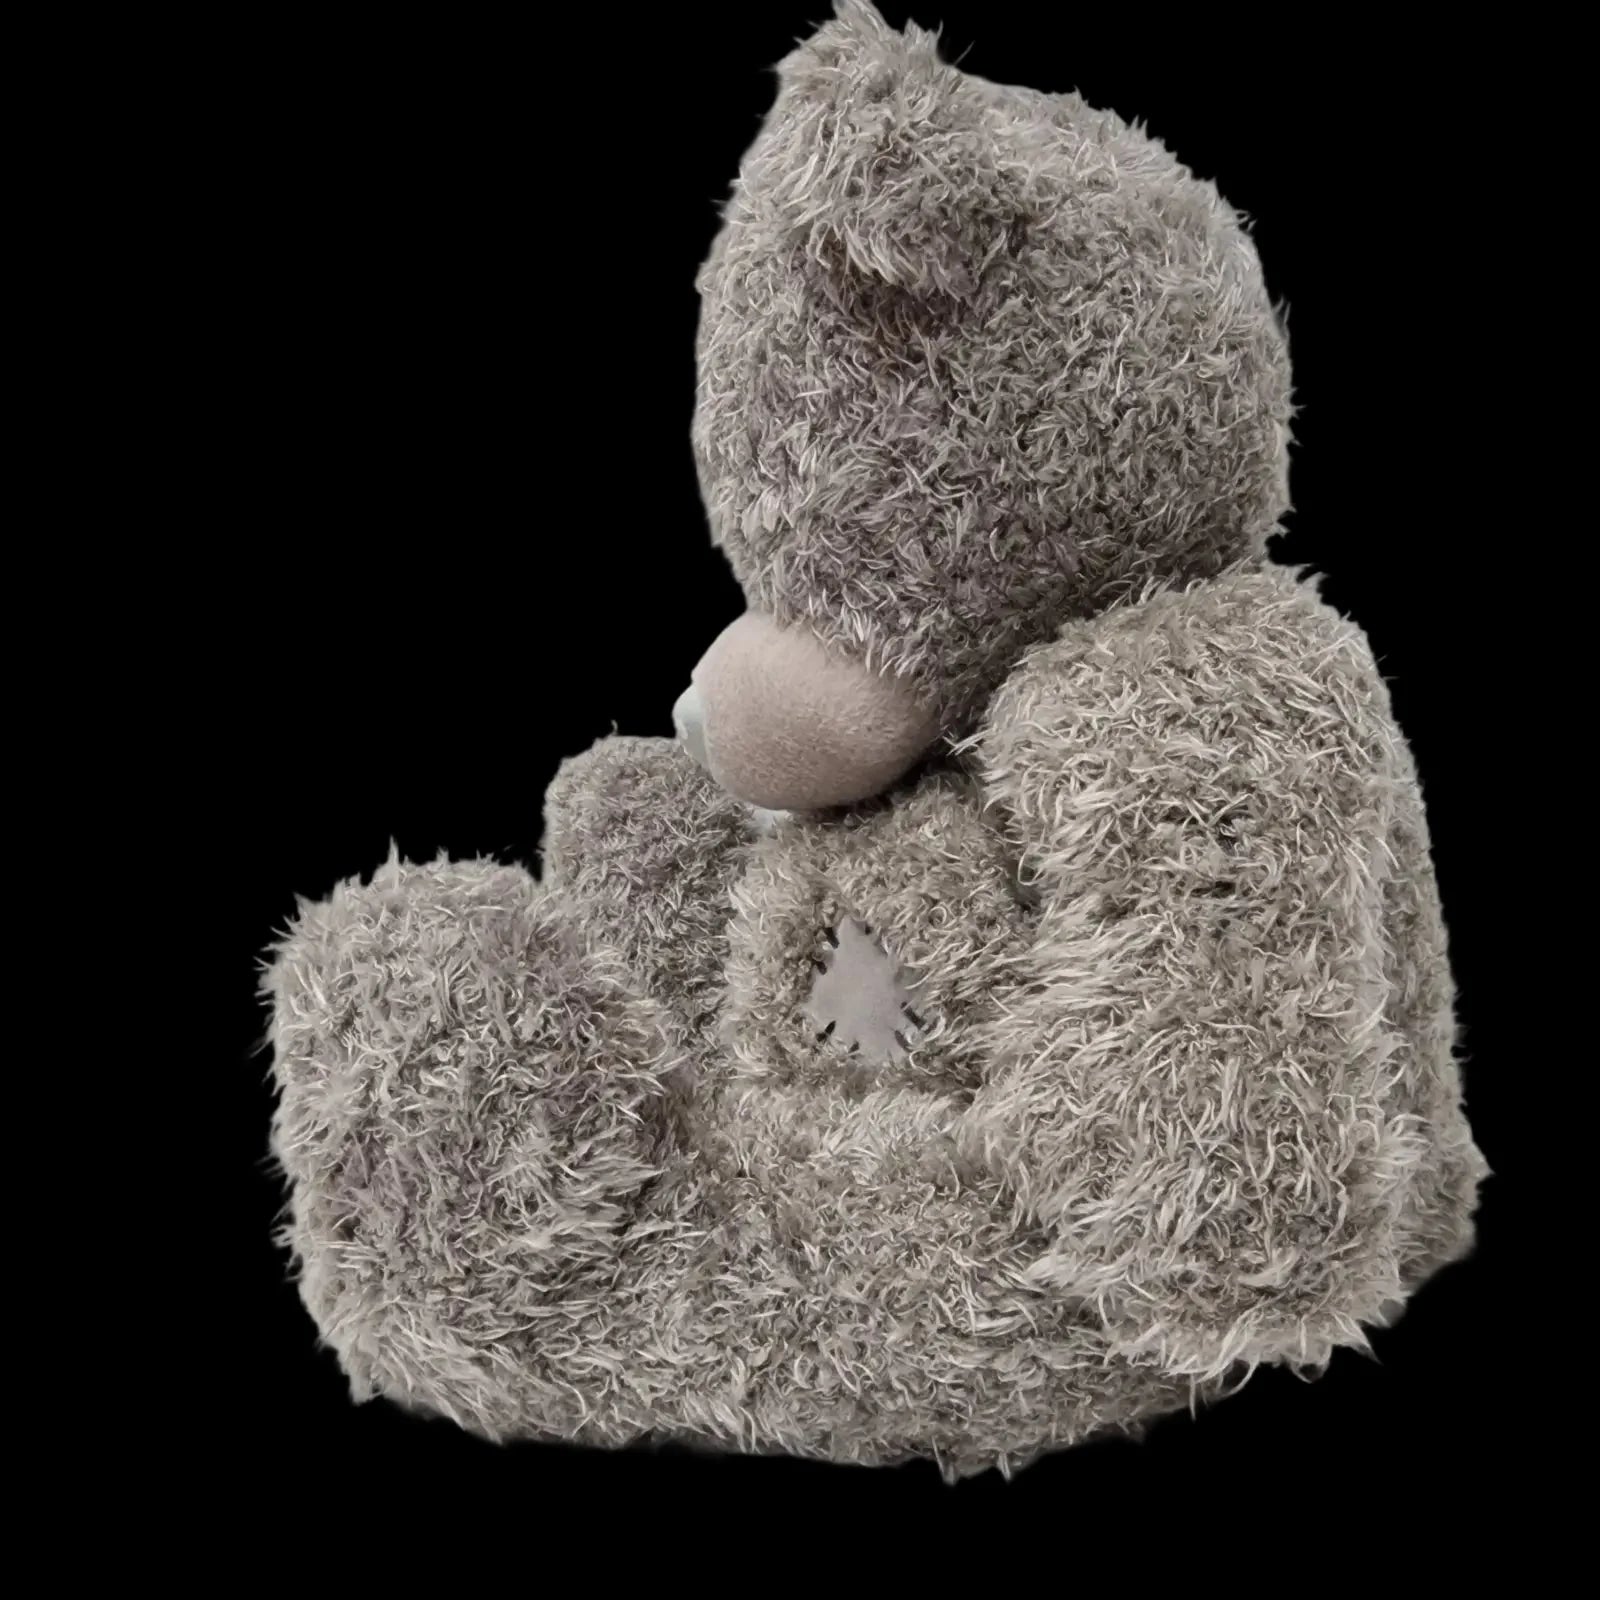 Me To You Soft Cuddly Toy Grey Plush Teddy Bears Small - 5